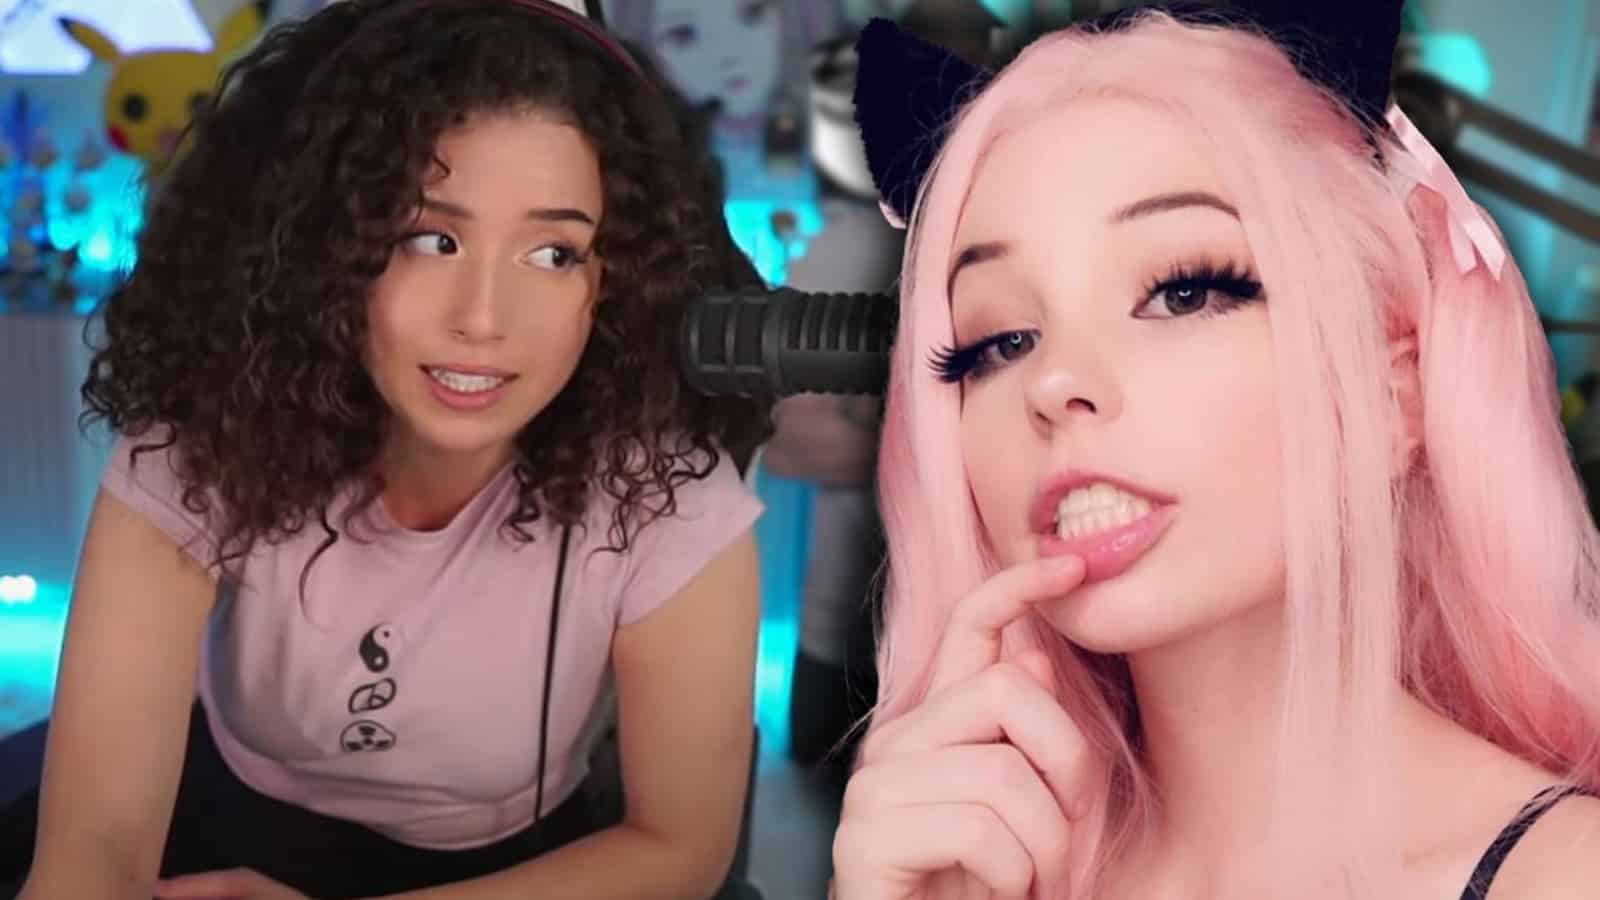 How Much Money Does Belle Delphine Make? Her OnlyFans Earnings